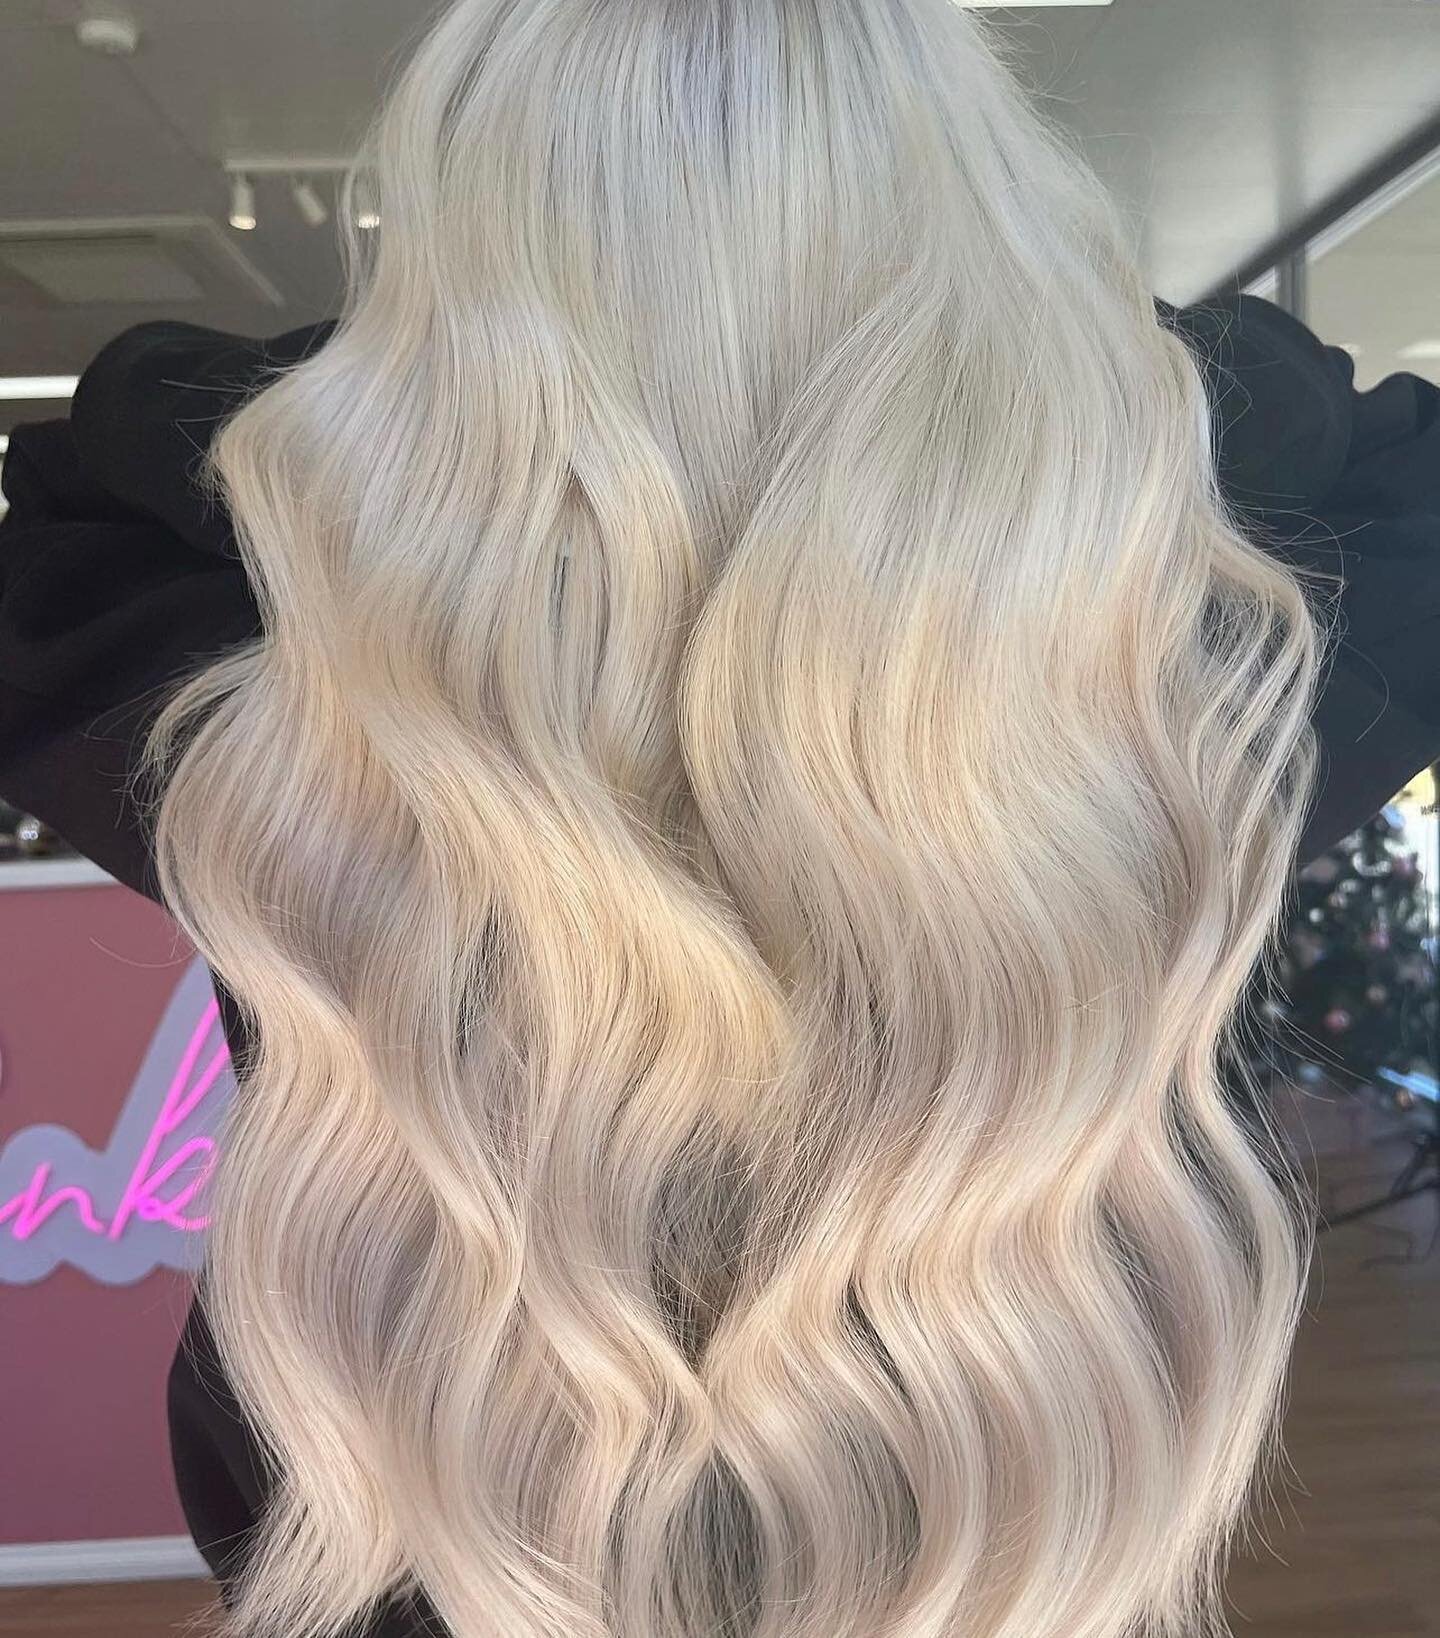 Princess hair 👑

Global lighten + A full head of our luxury 20inch wefts ☁️